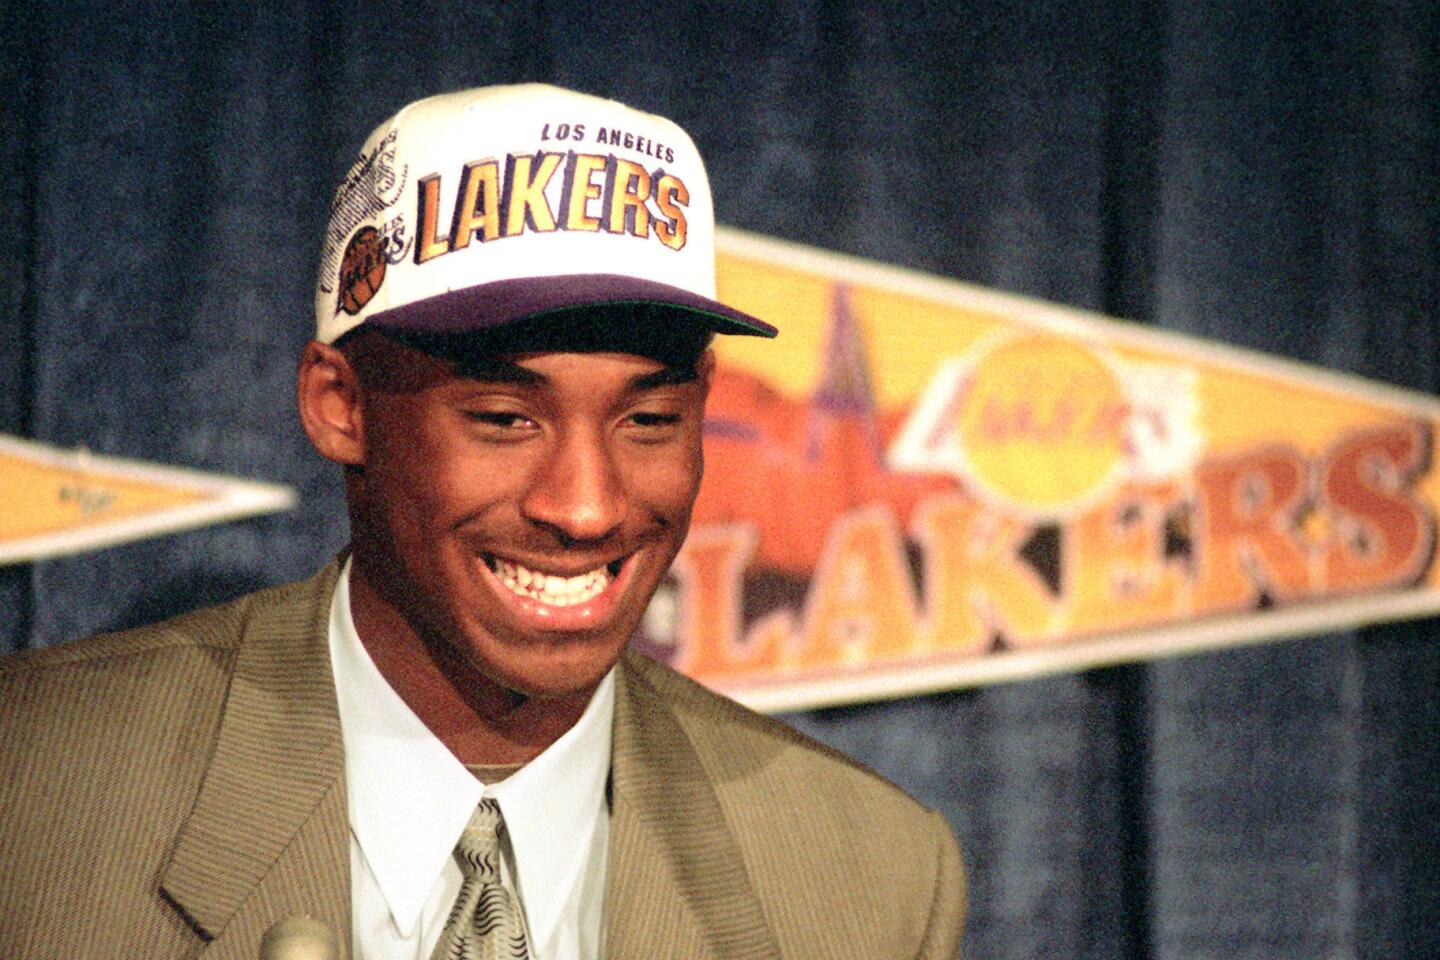 KGET - TV 17 Bakersfield - KOBE BRYANT DAY: 8/24 is Kobe Bryant Day in Los  Angeles and Orange County. The day honoring the Lakers legend is meant to  represent the two